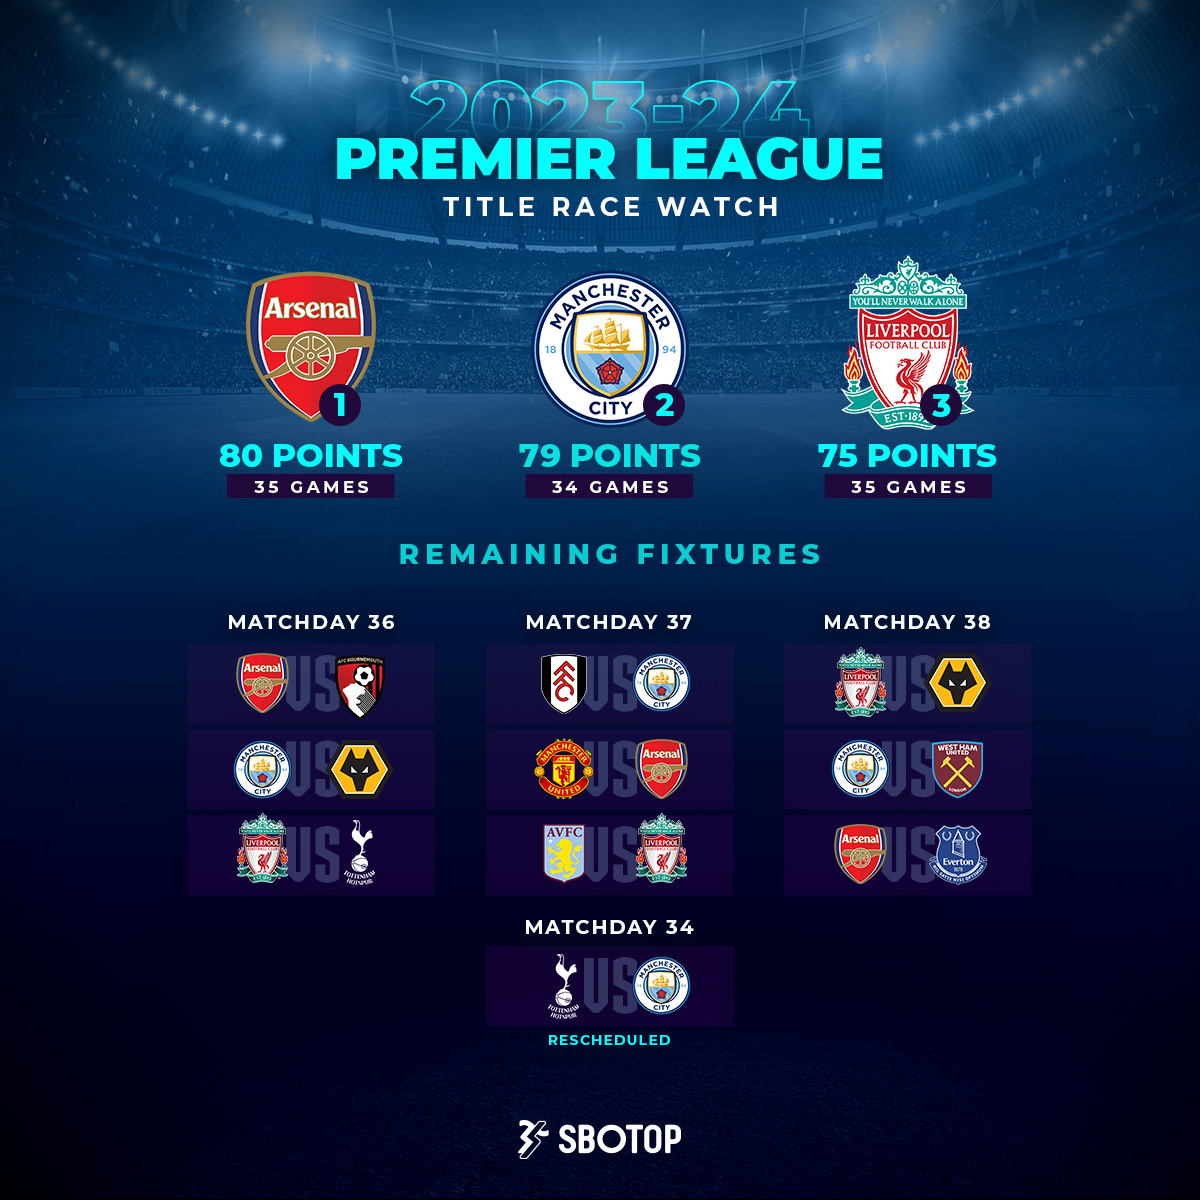 #PremierLeague title race intensifies! 🔥 Who will emerge victorious in the final stretch?